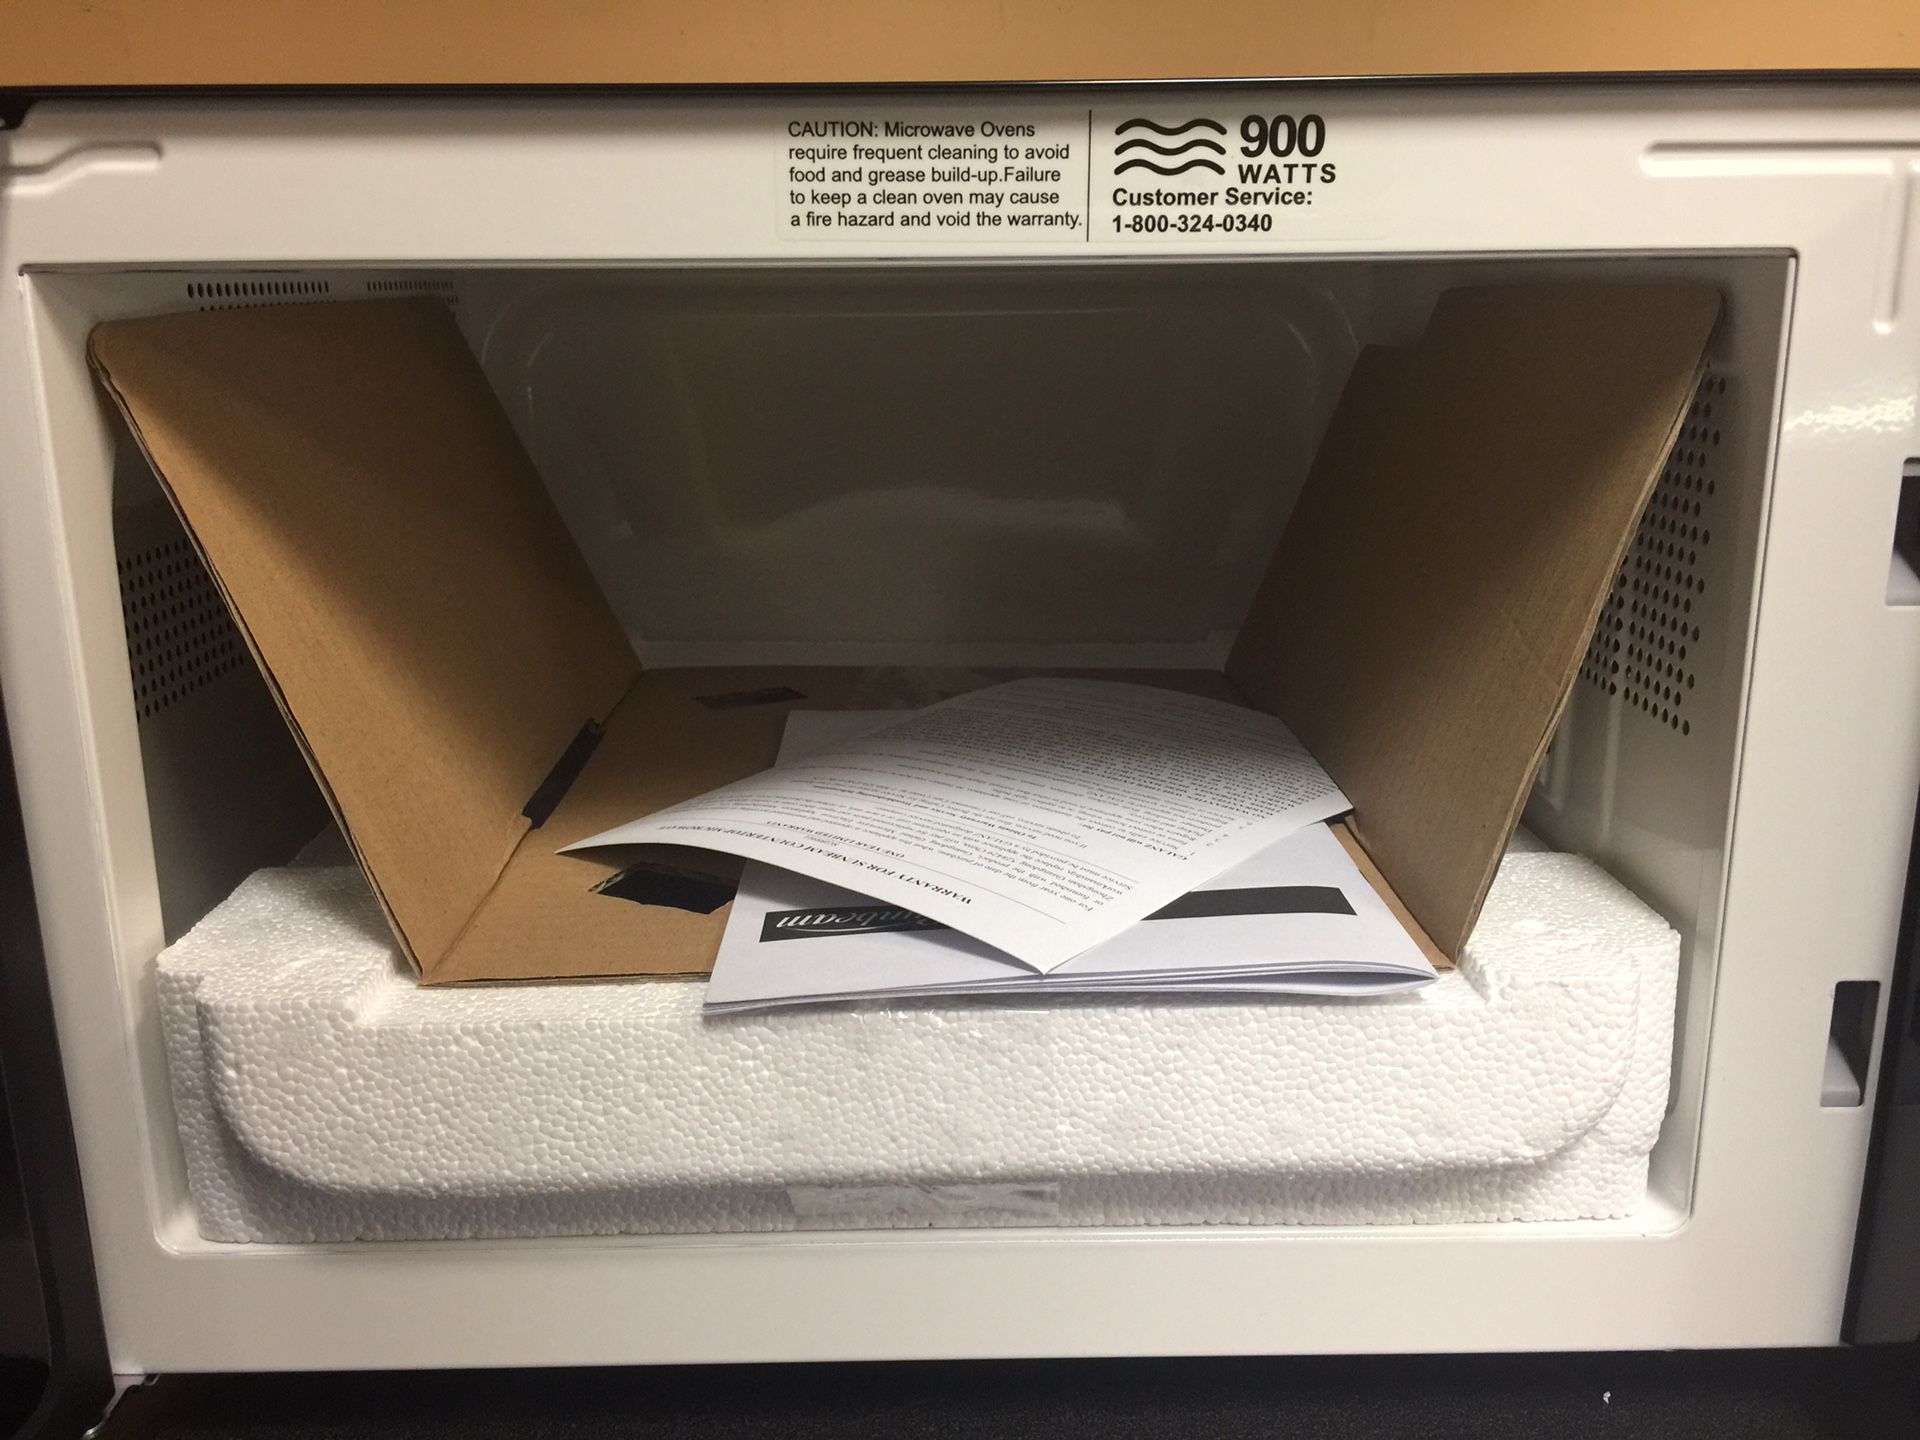 Best Sunbeam Microwave “brand New” Never Used for sale in Newburgh